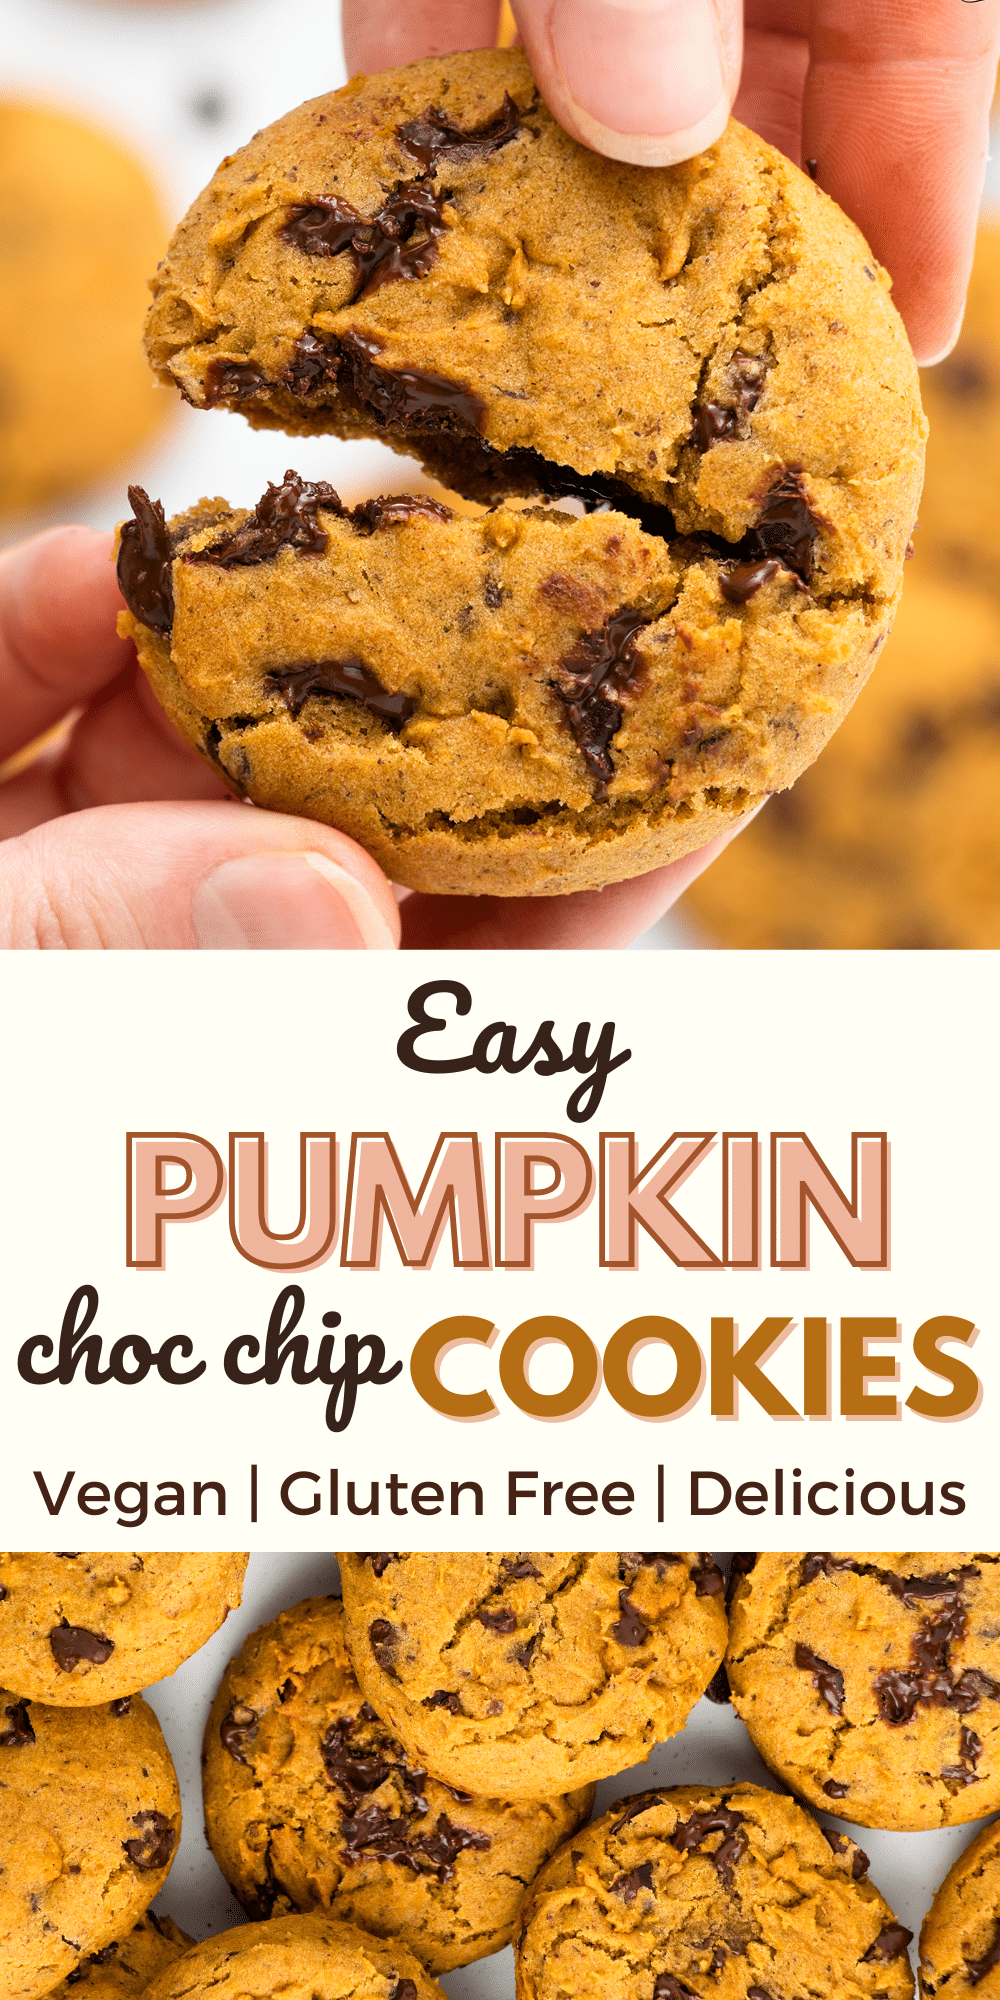 Vegan Pumpkin Chocolate Chip Cookies are the soft and chewy fall cookie of your dreams! These gluten-free cookies are so easy to make with no fancy ingredients required.